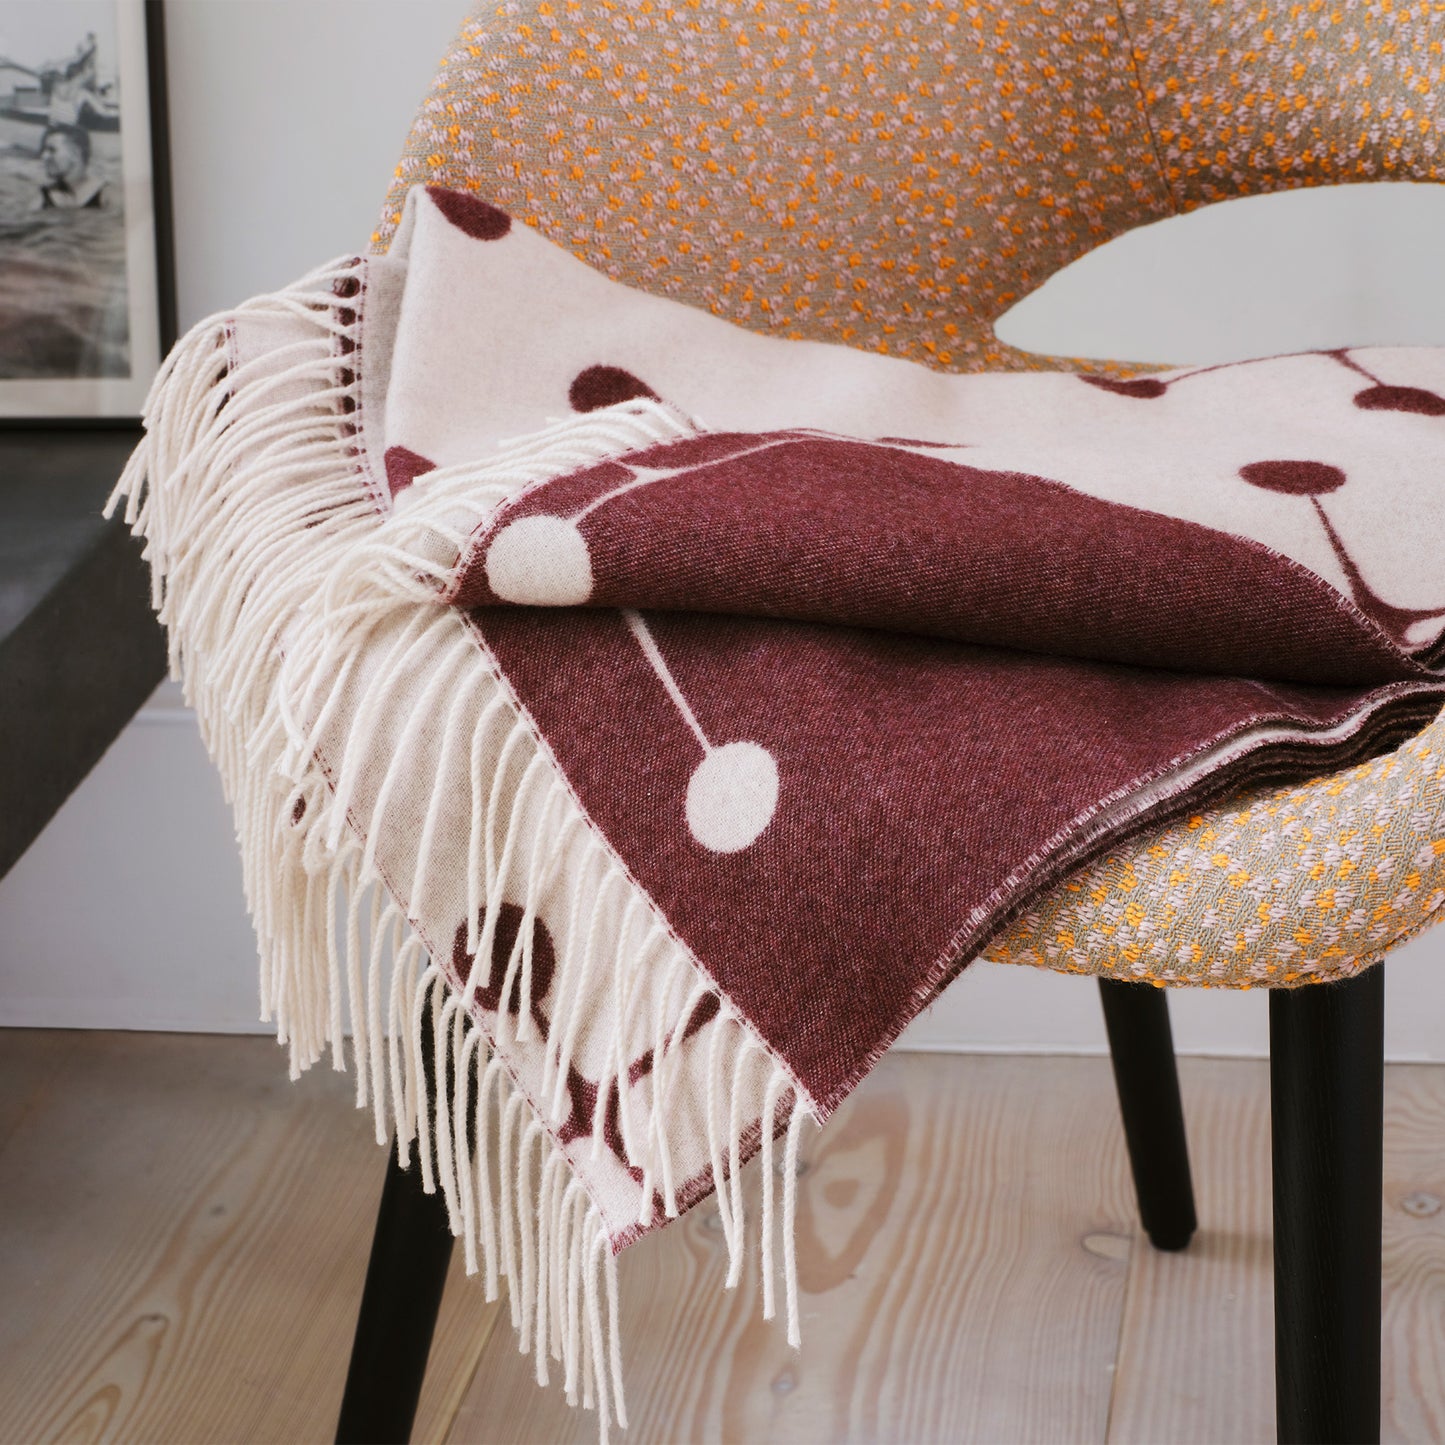 Vitra Eames Wool Blanket Ullteppe (Limited Edition)